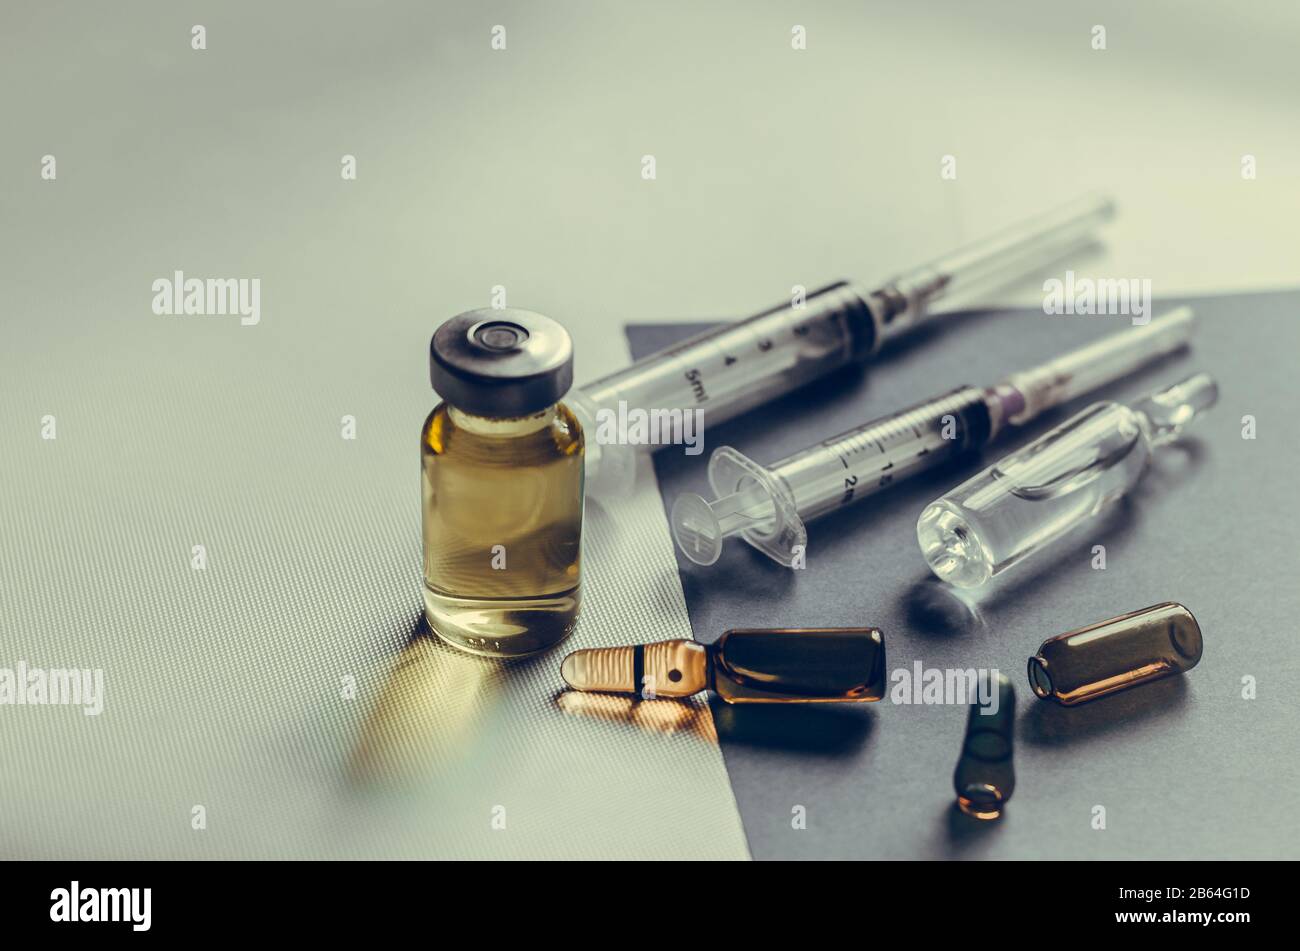 Randomly scattered Medicines on the table. Syringes and ampoules on a gray background. Eye level shooting. Close-up. Selective focus. Without people. Stock Photo